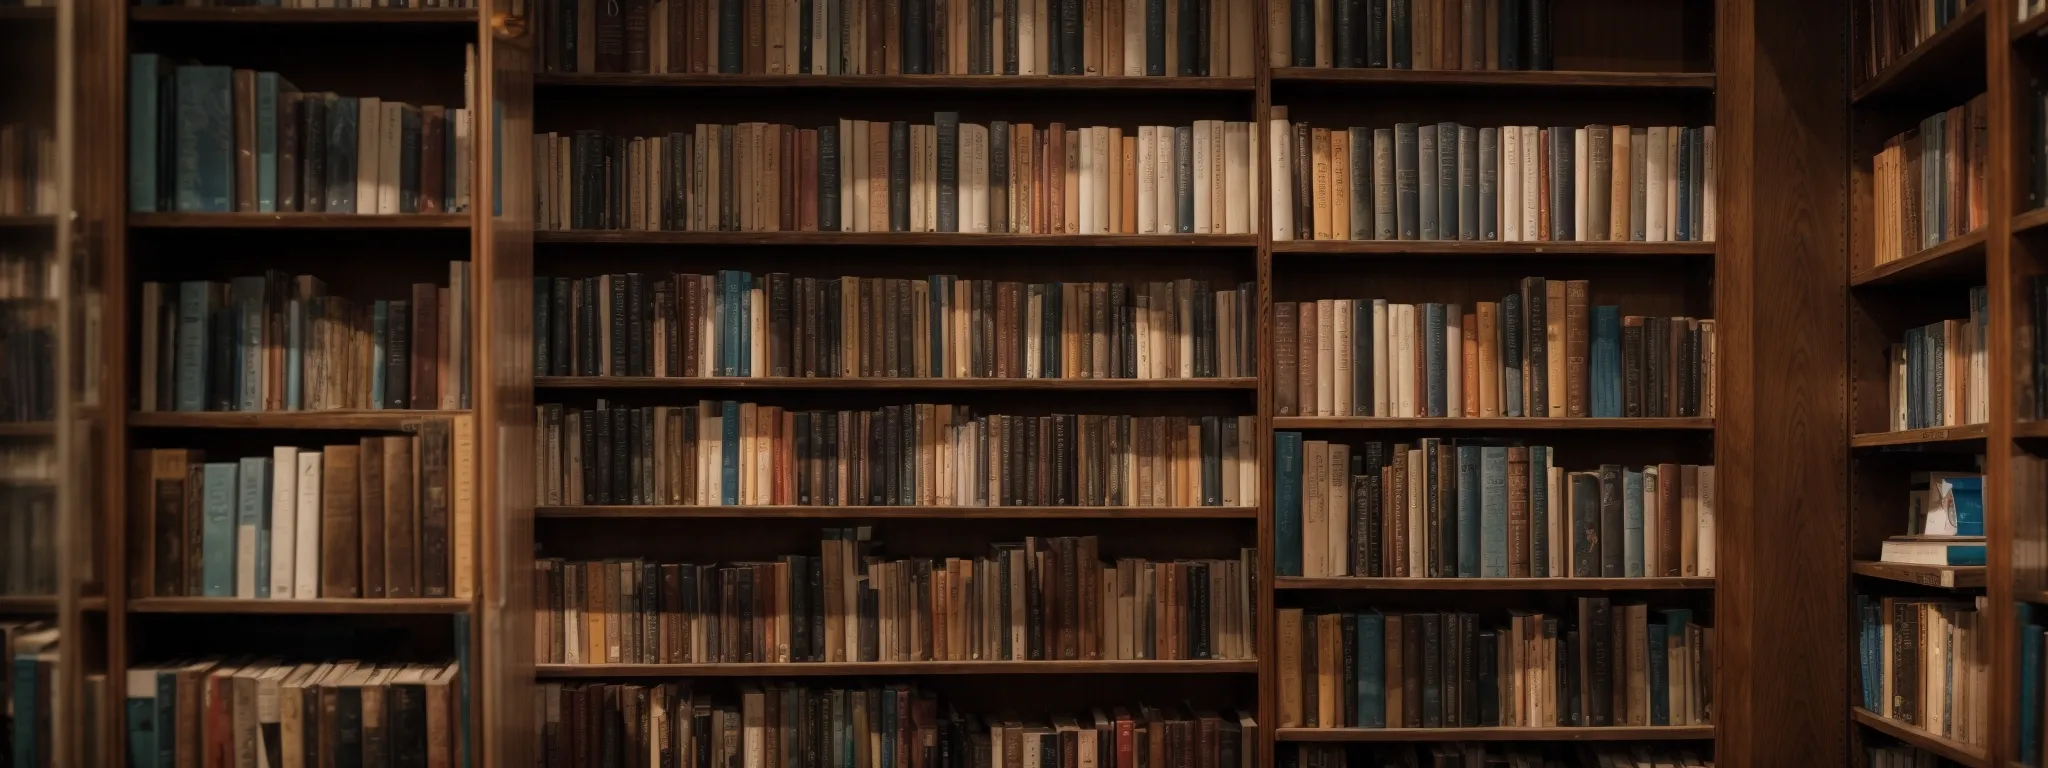 a close-up of a well-organized library with books categorized and shelved according to different subjects and genres.